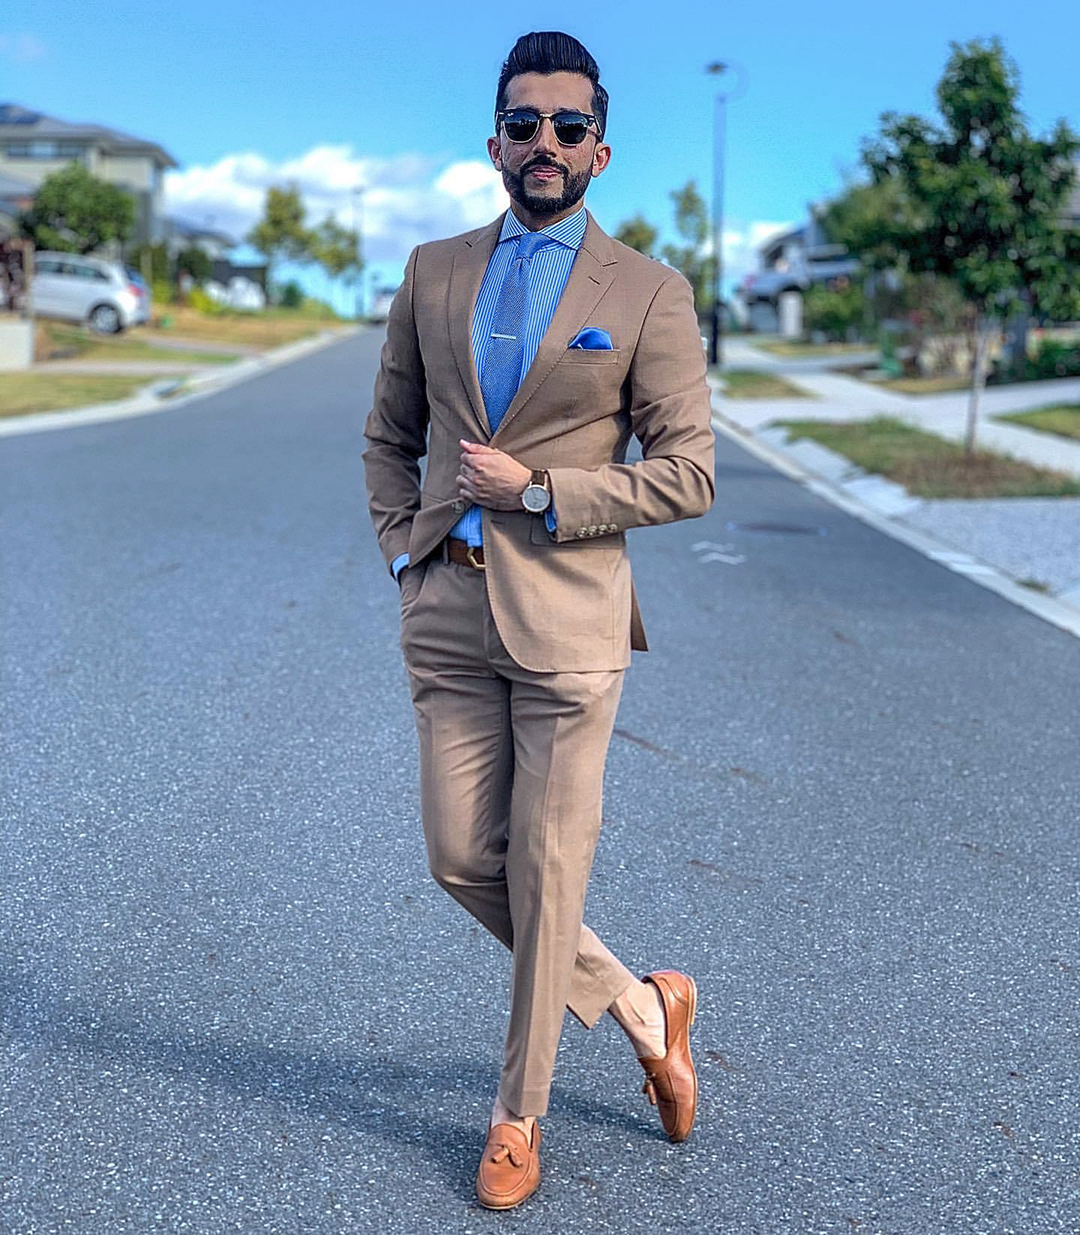 How to wear a tan suit with a blue-striped shirt